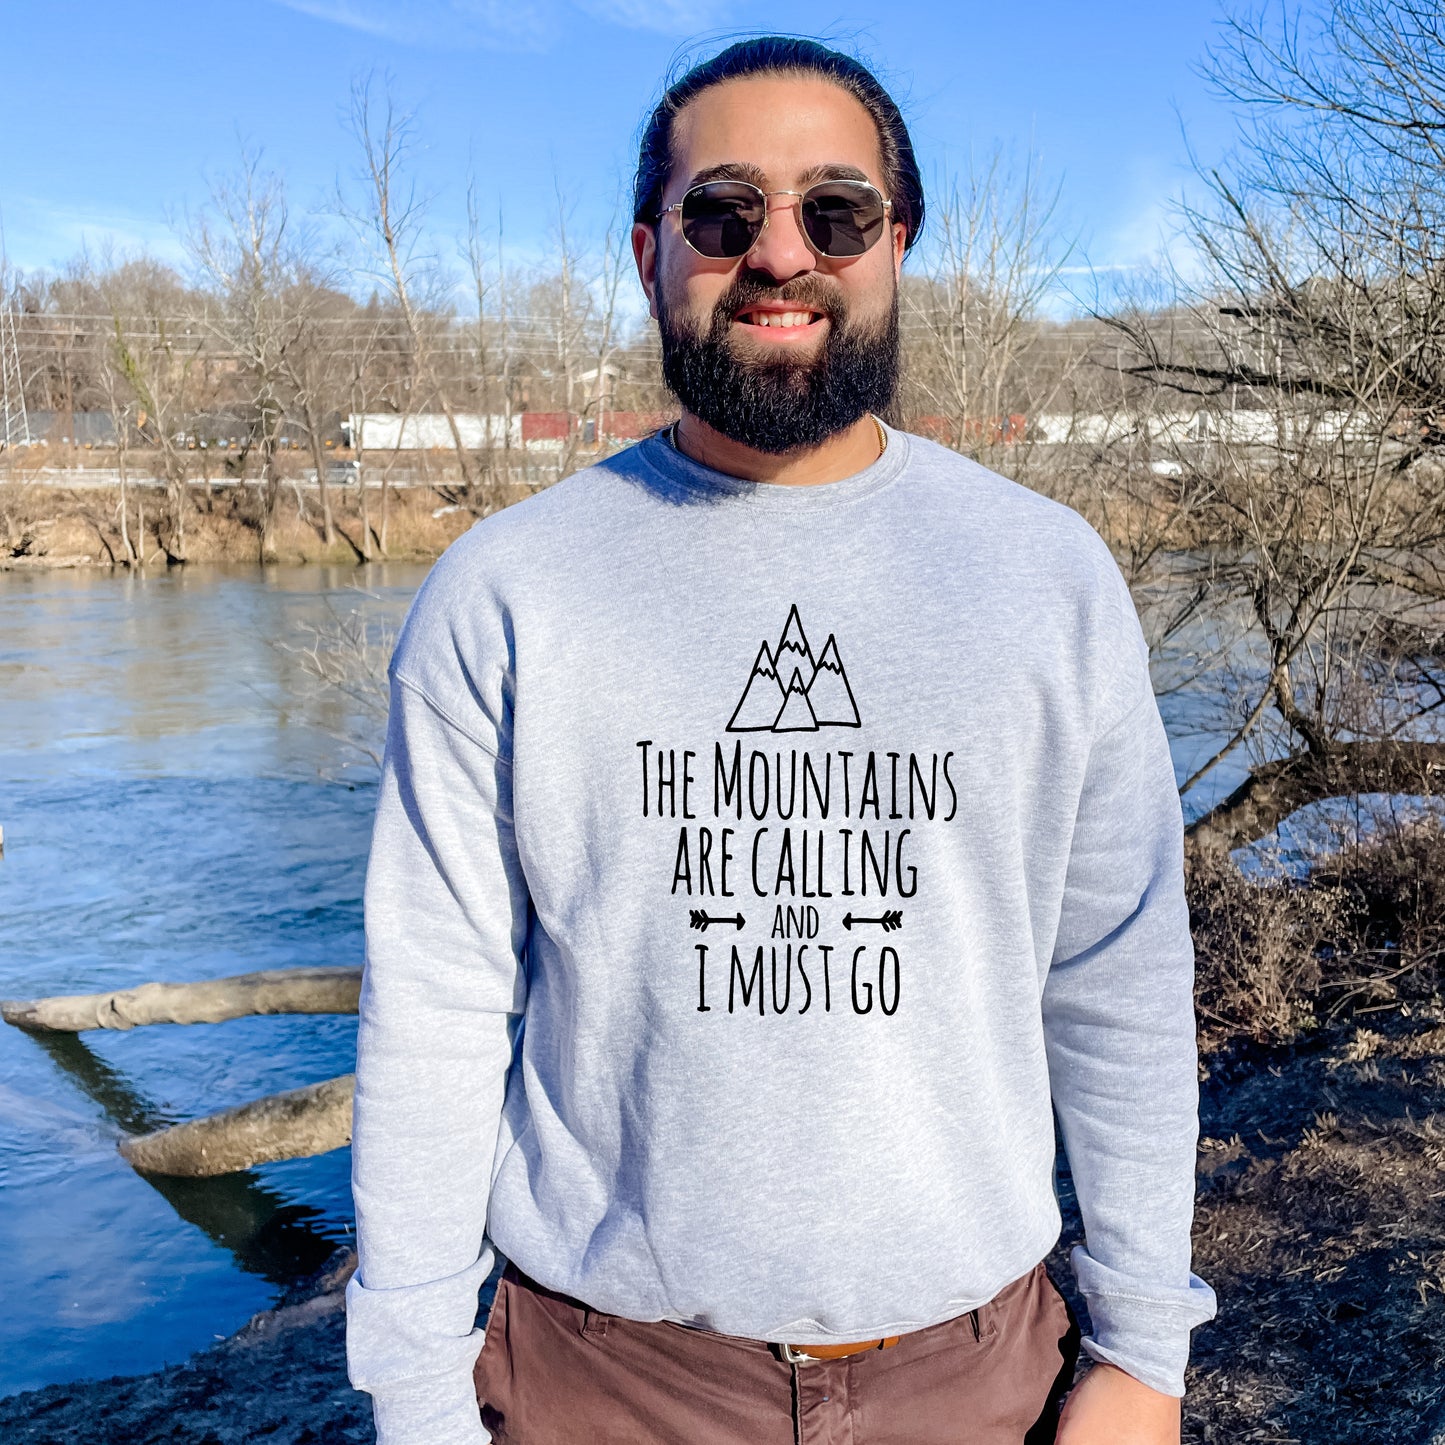 The Mountains Are Calling And I Must Go - Unisex Sweatshirt - Heather Gray or Dusty Blue